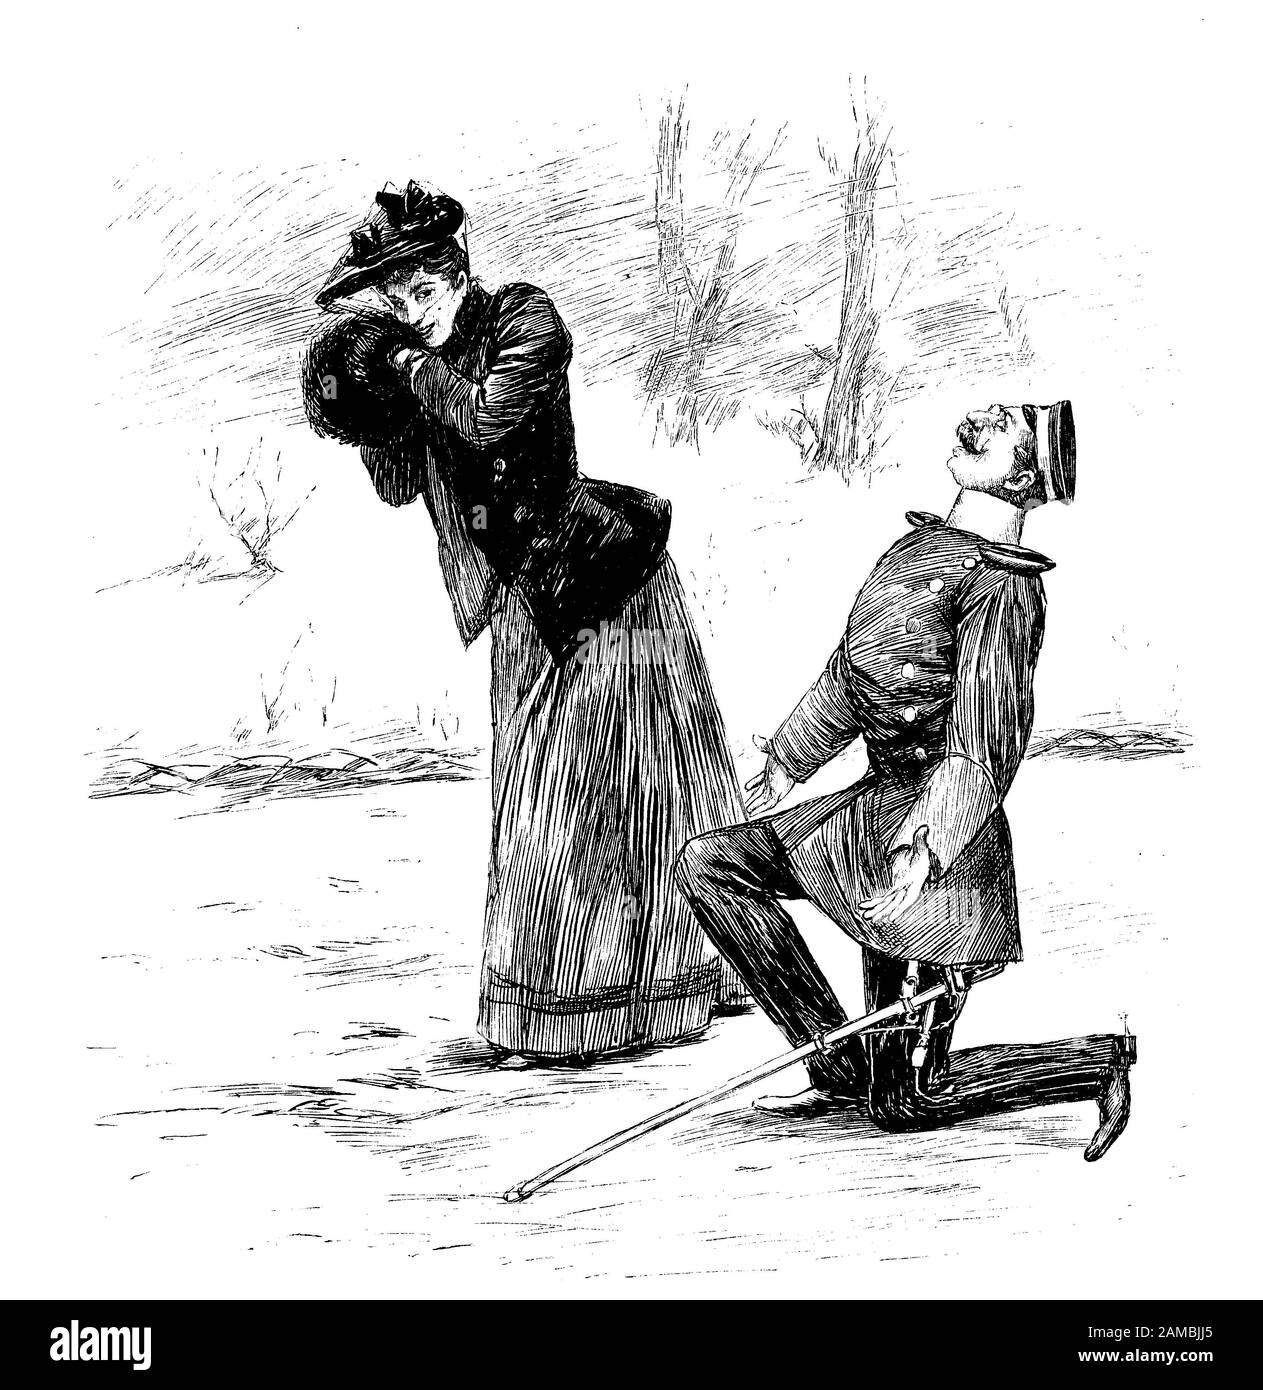 German satirical magazine unrequited love: a dapper officer with elegant uniform, monocle and sword declares his love kneeling outdoor in front of a young woman, who embarassed hides her faces laughing Stock Photo